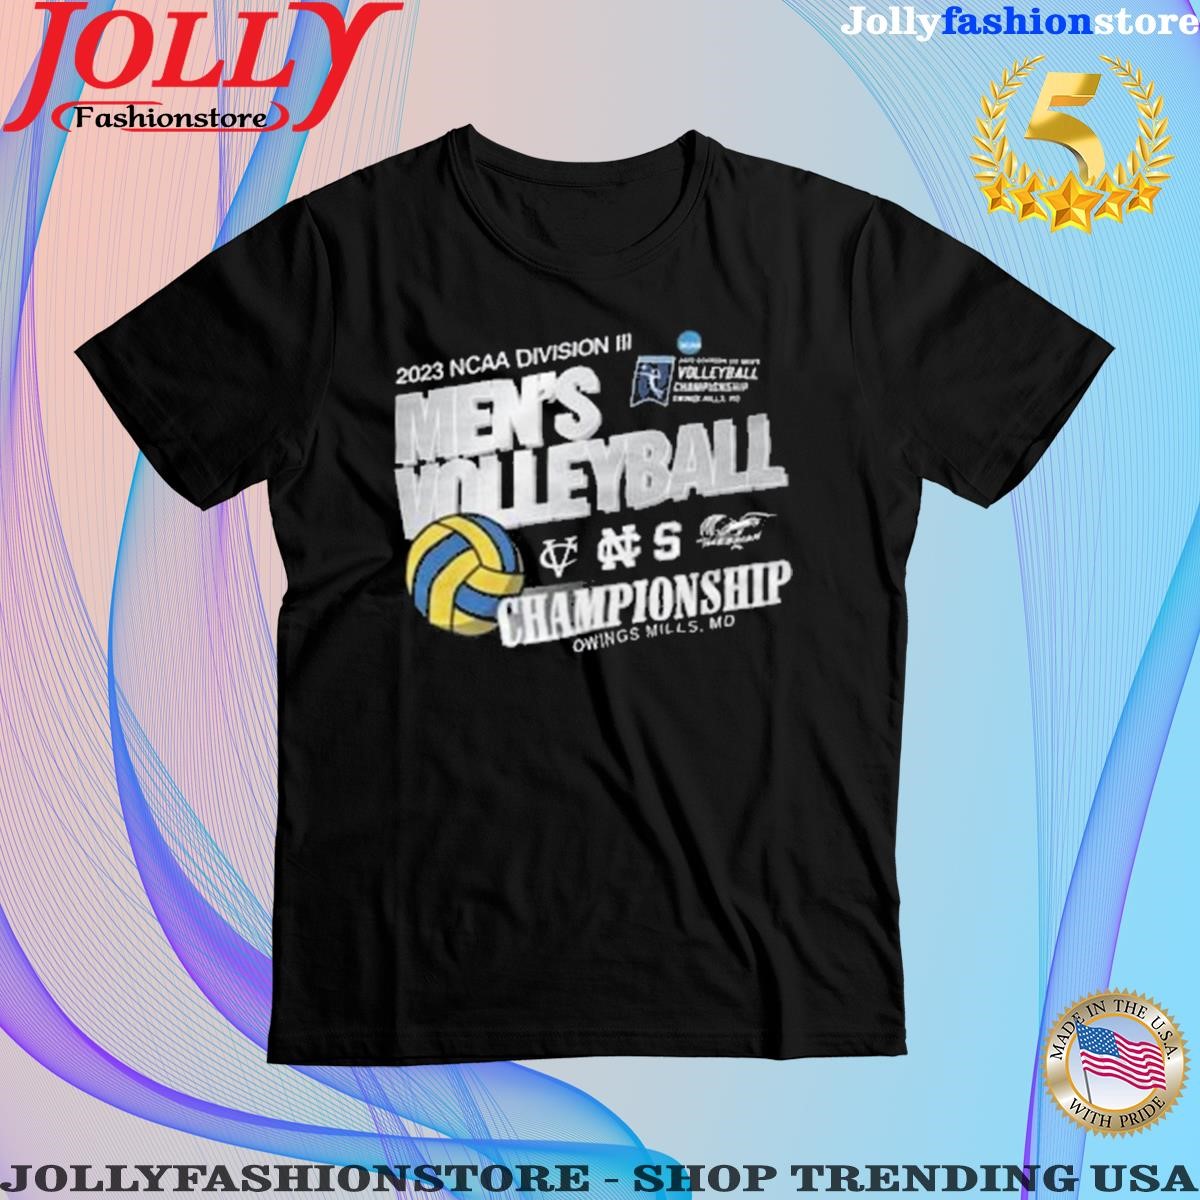 2023 ncaa Division iiI men's volleyball championship owings mills md shirt